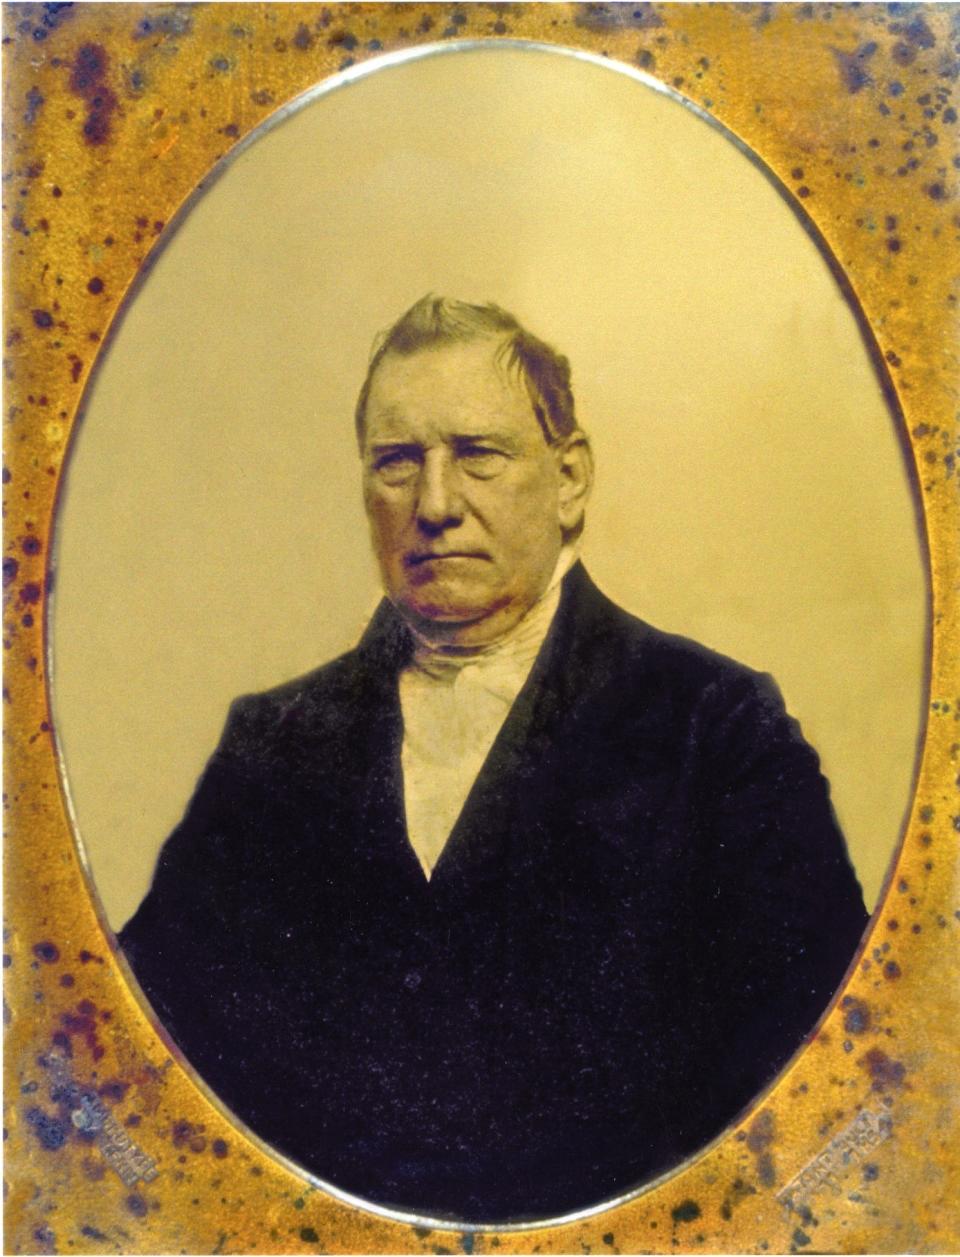 Charles McMicken donated the money that built the University of Cincinnati.